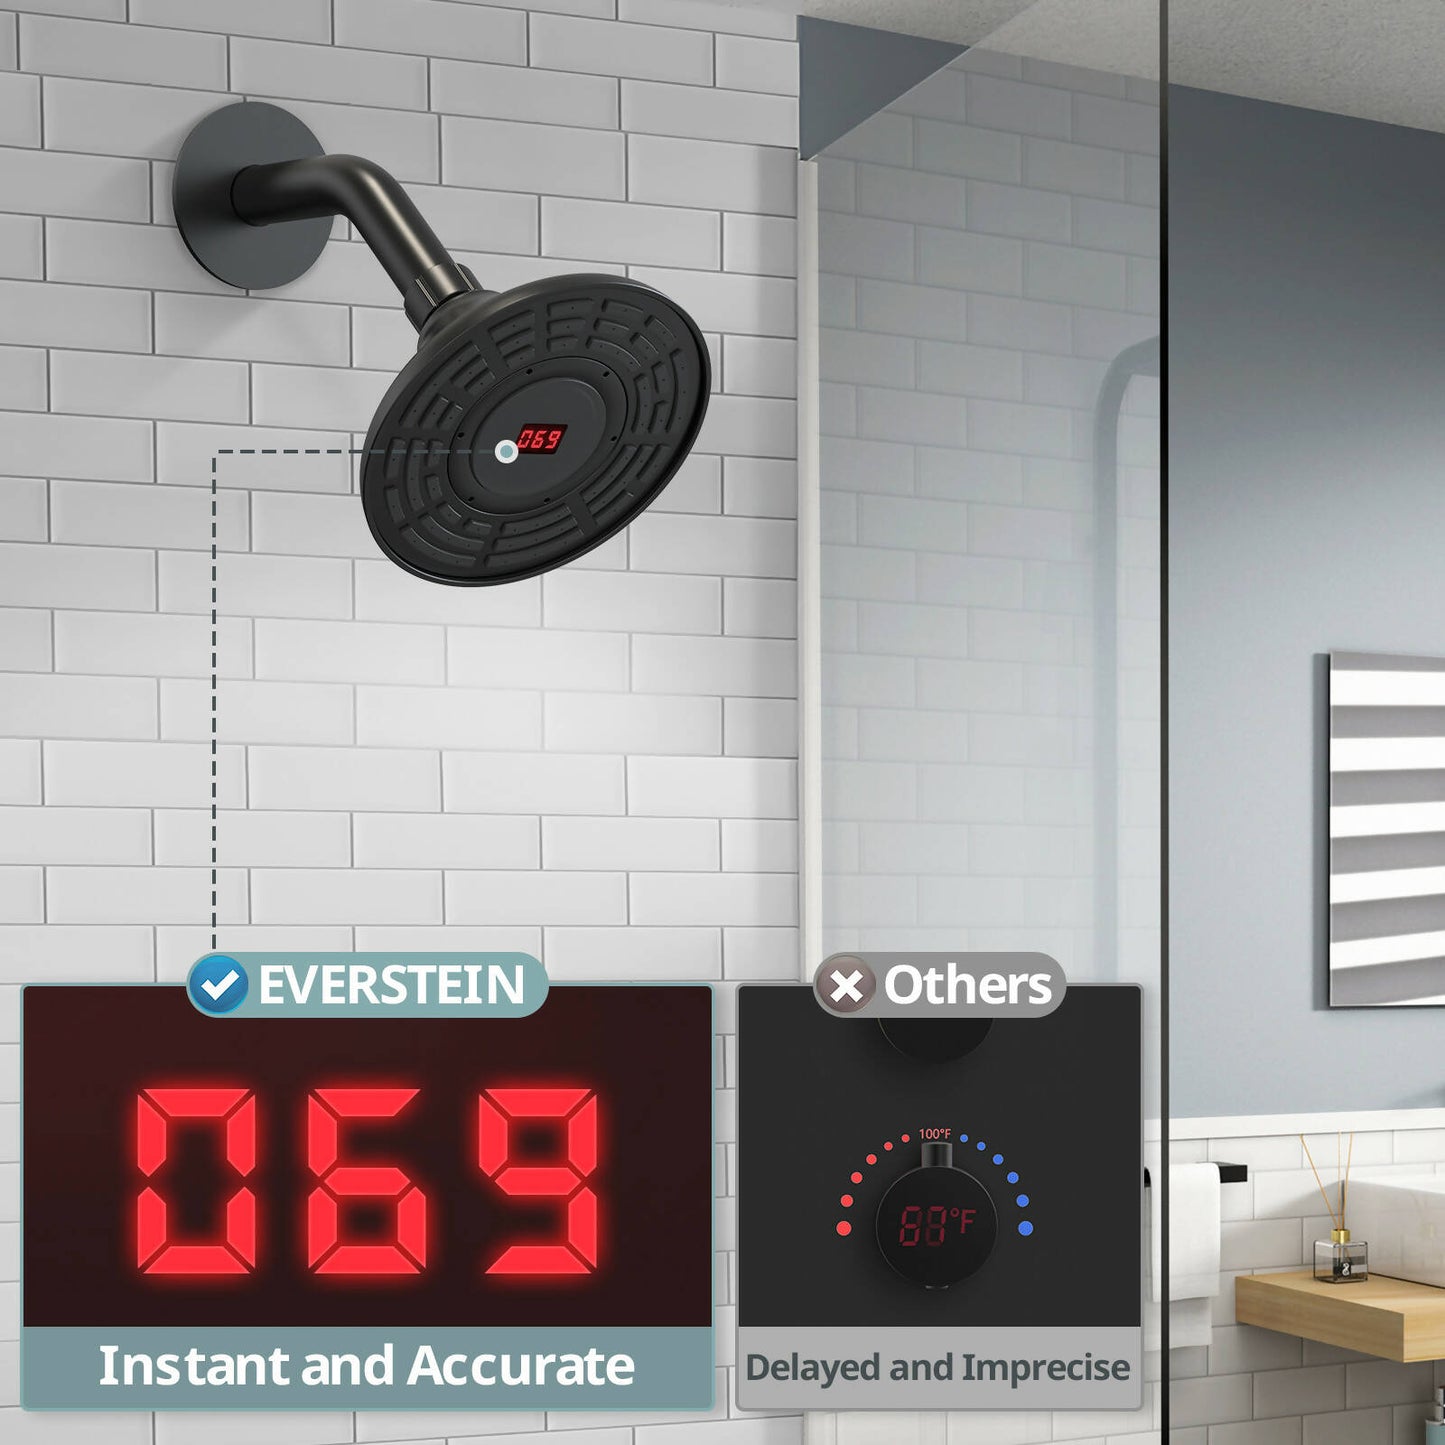 EVERSTEIN Digital Display Thermostatic Shower Faucet Set with Rough-in Valve